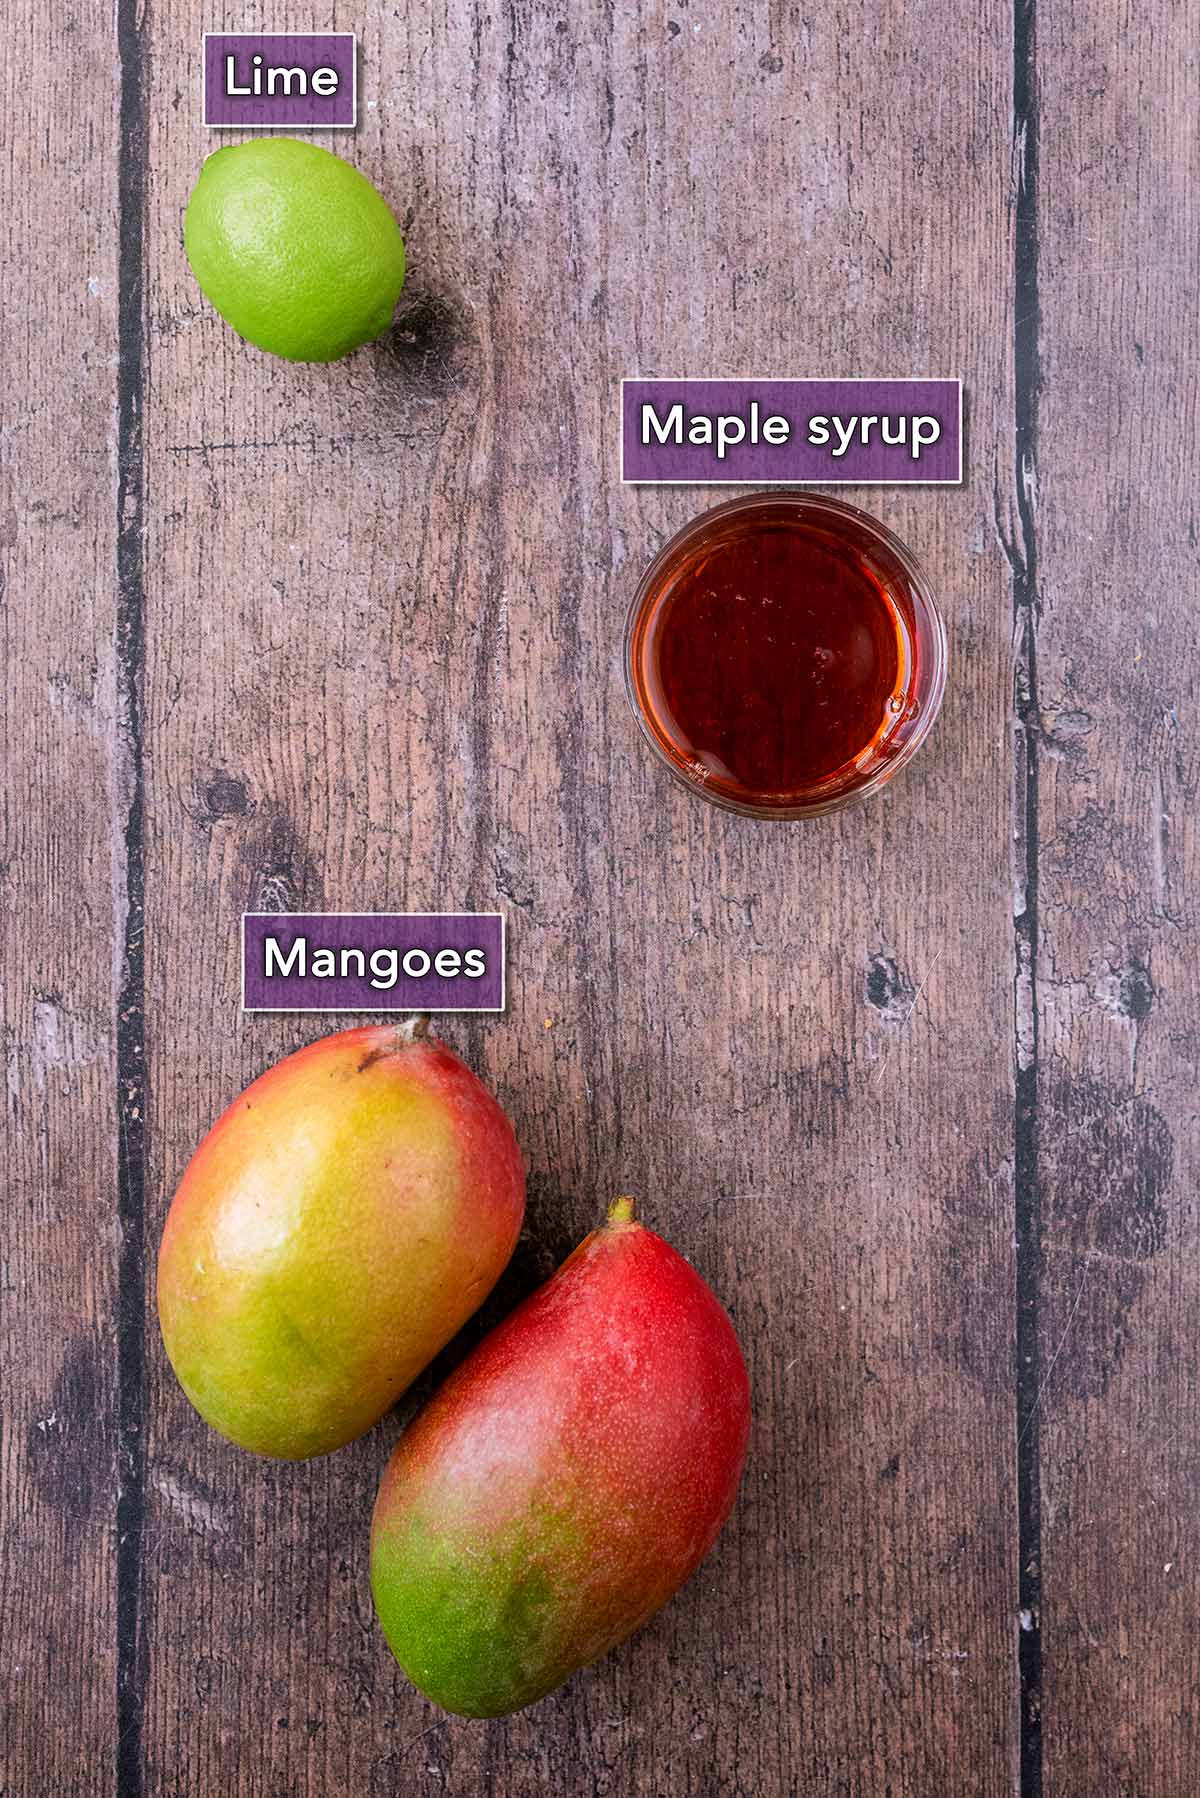 All the ingredients needed to make this recipe with text overlay labels.